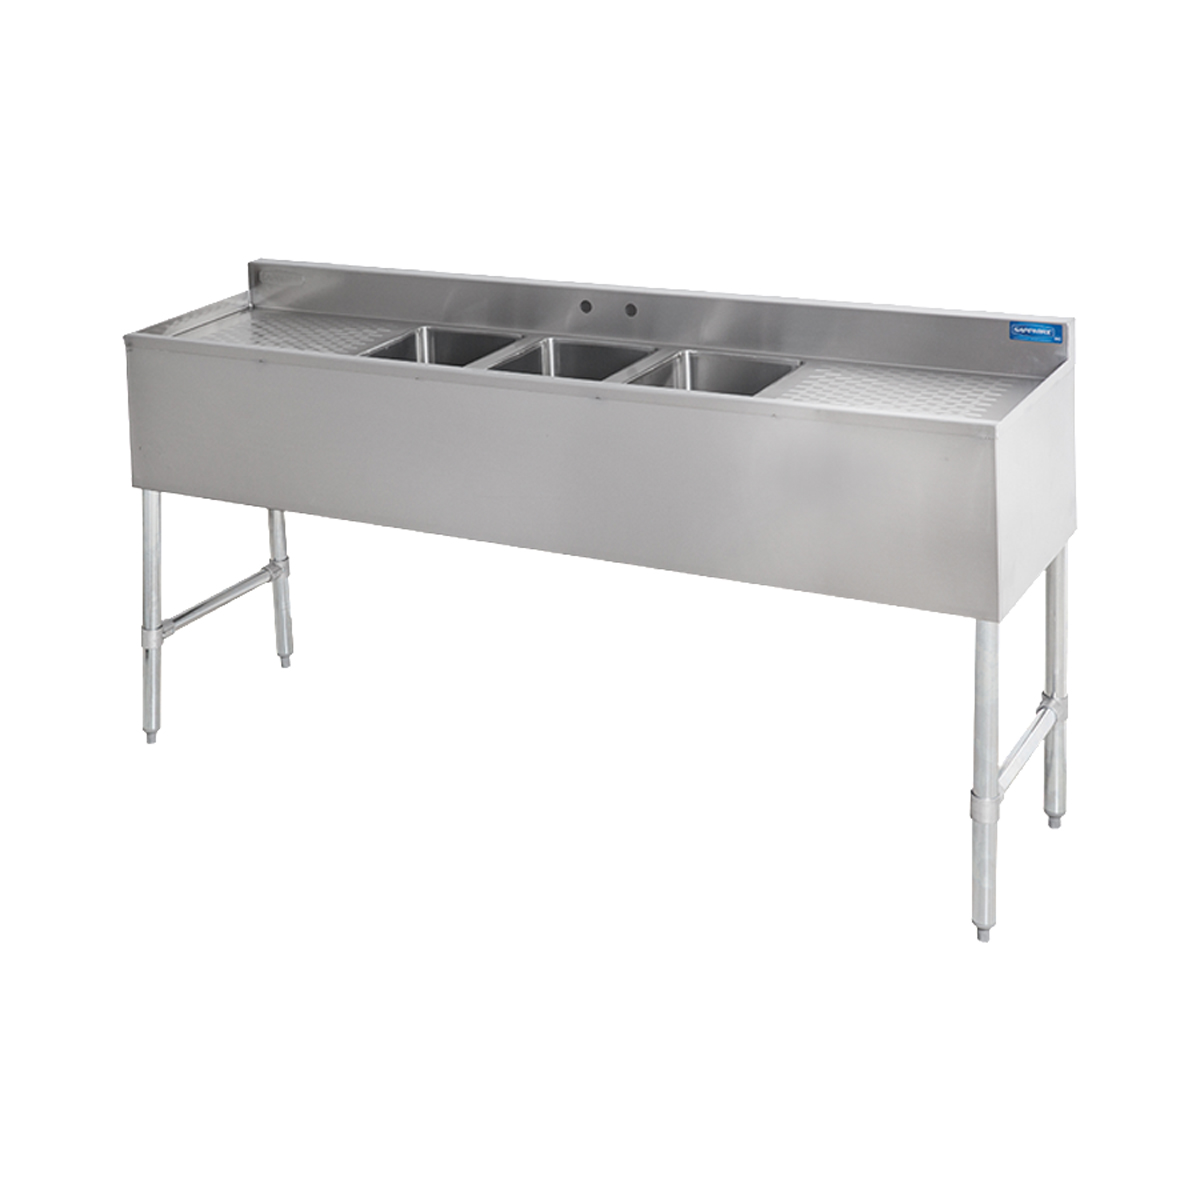 Sapphire SMBS-3D Three Compartment Underbar Sink Unit with Two Drainboards